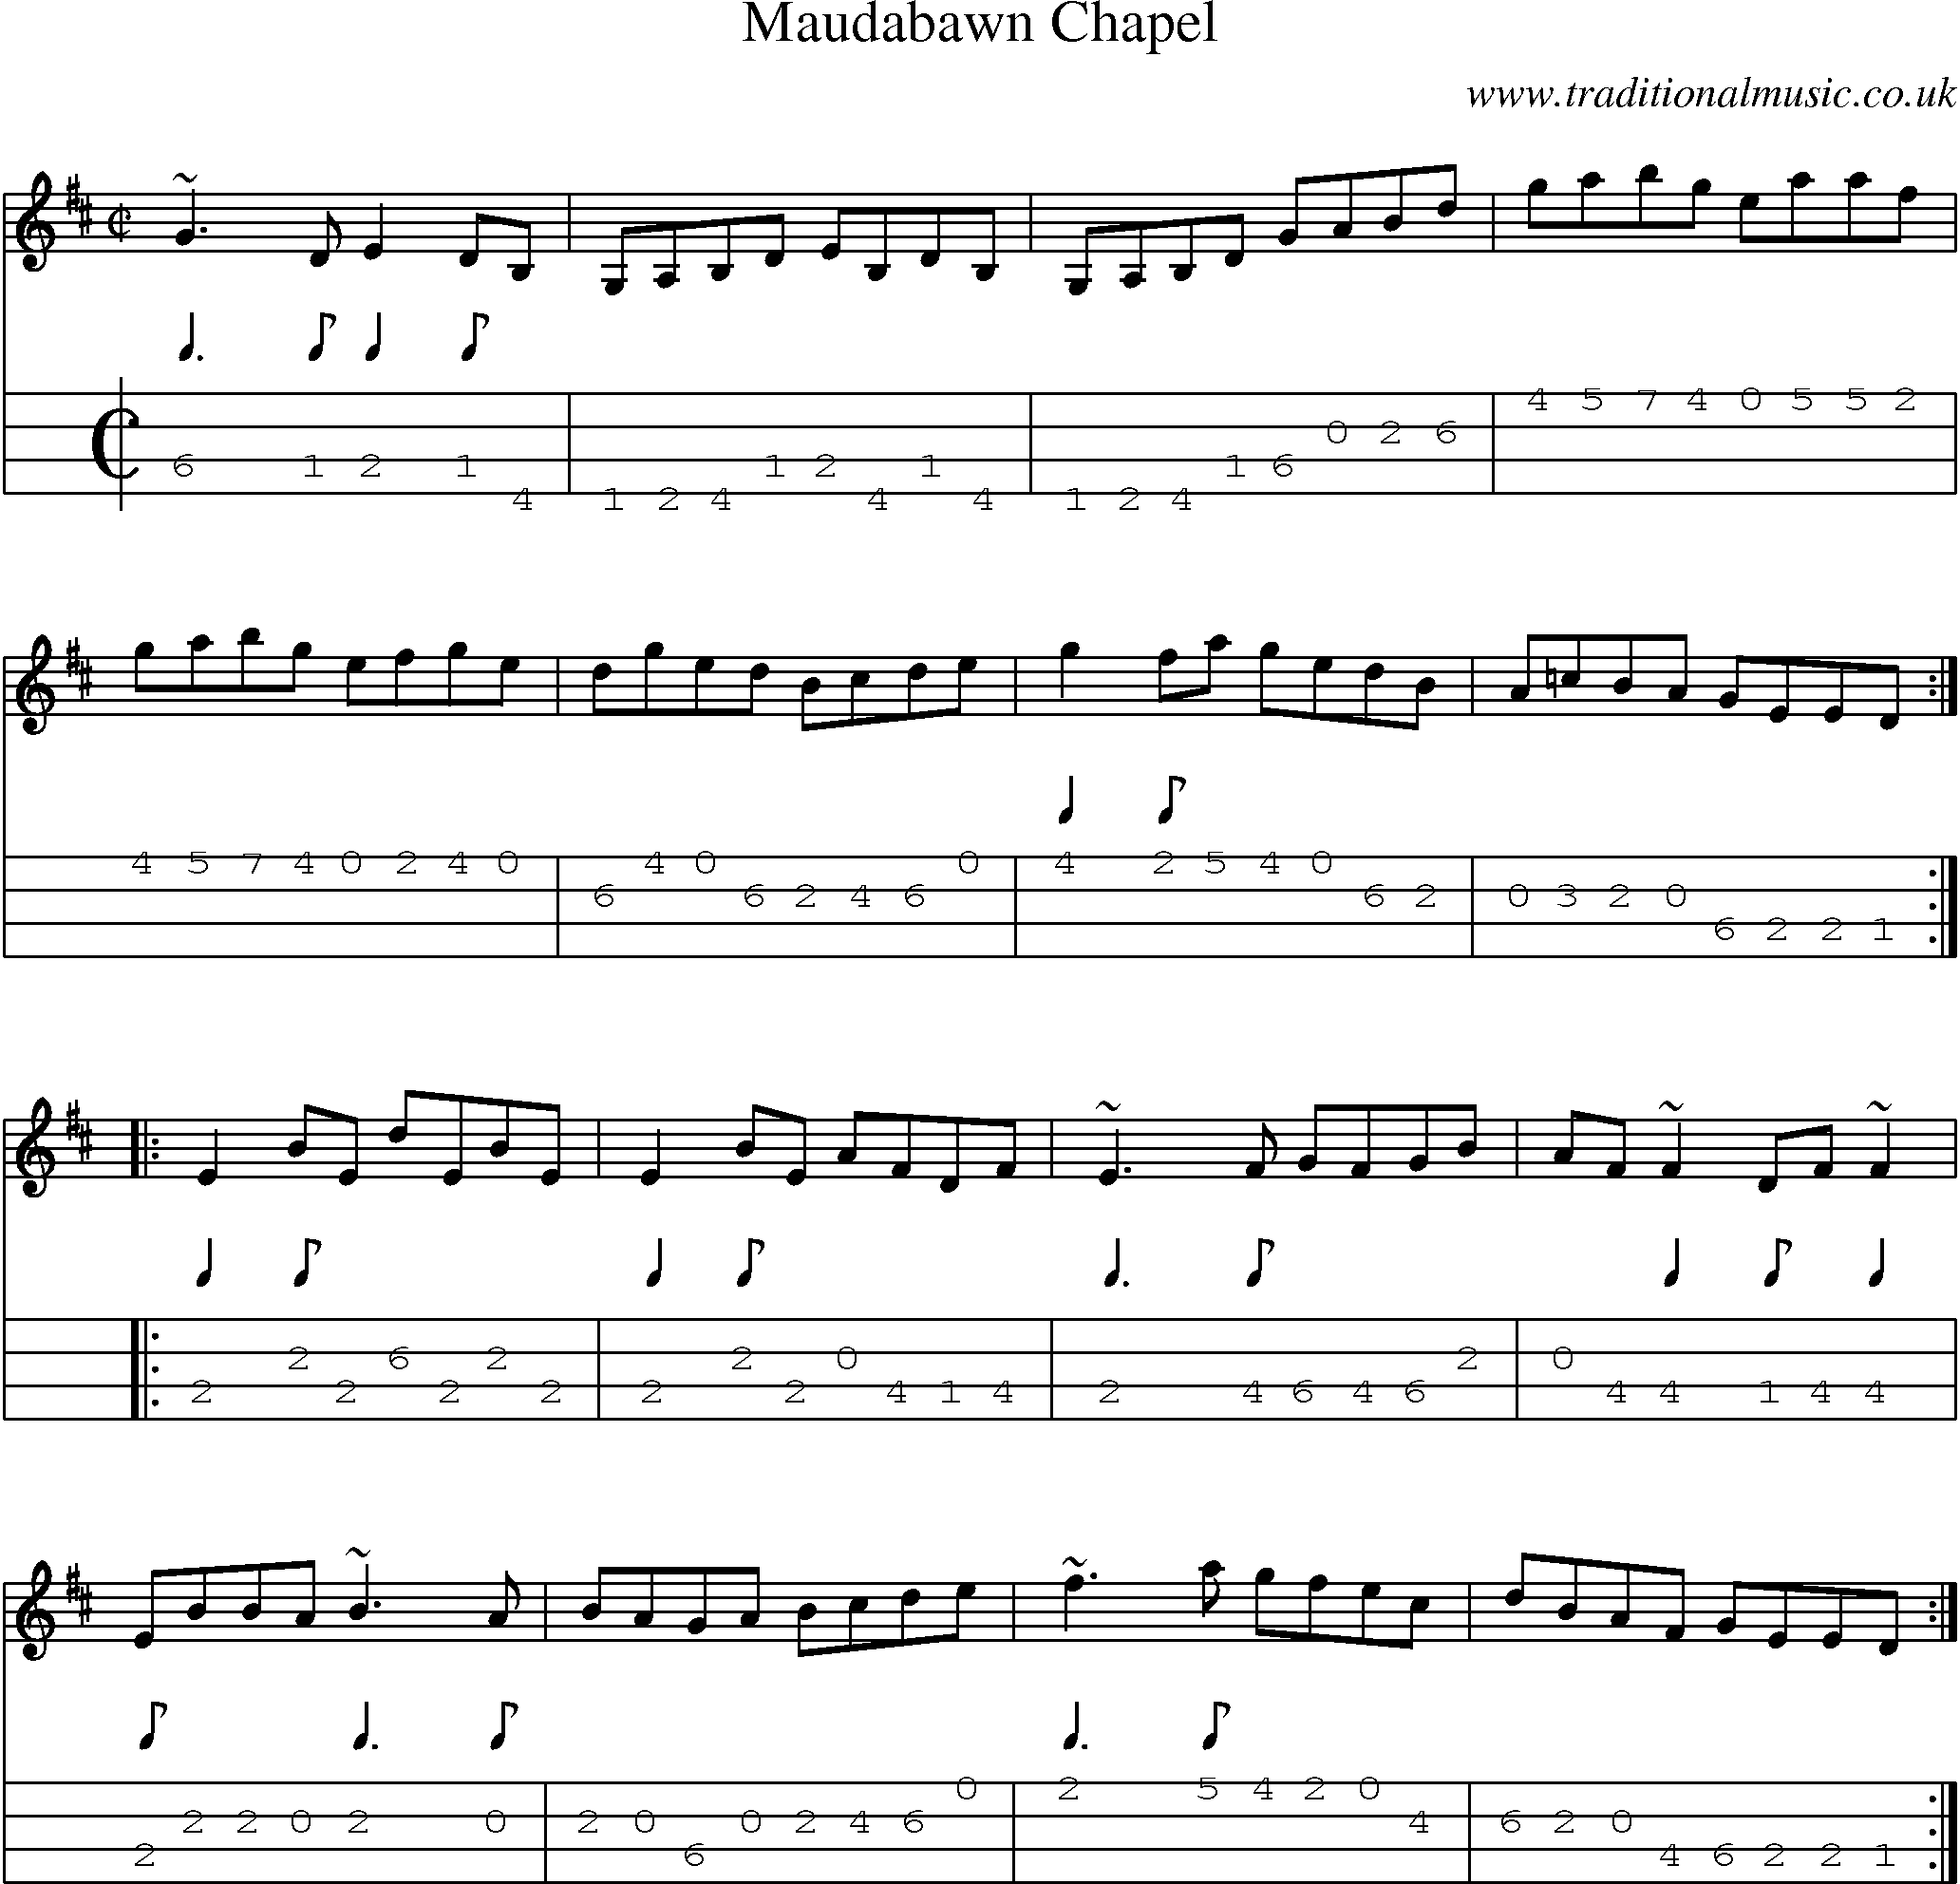 Music Score and Mandolin Tabs for Maudabawn Chapel